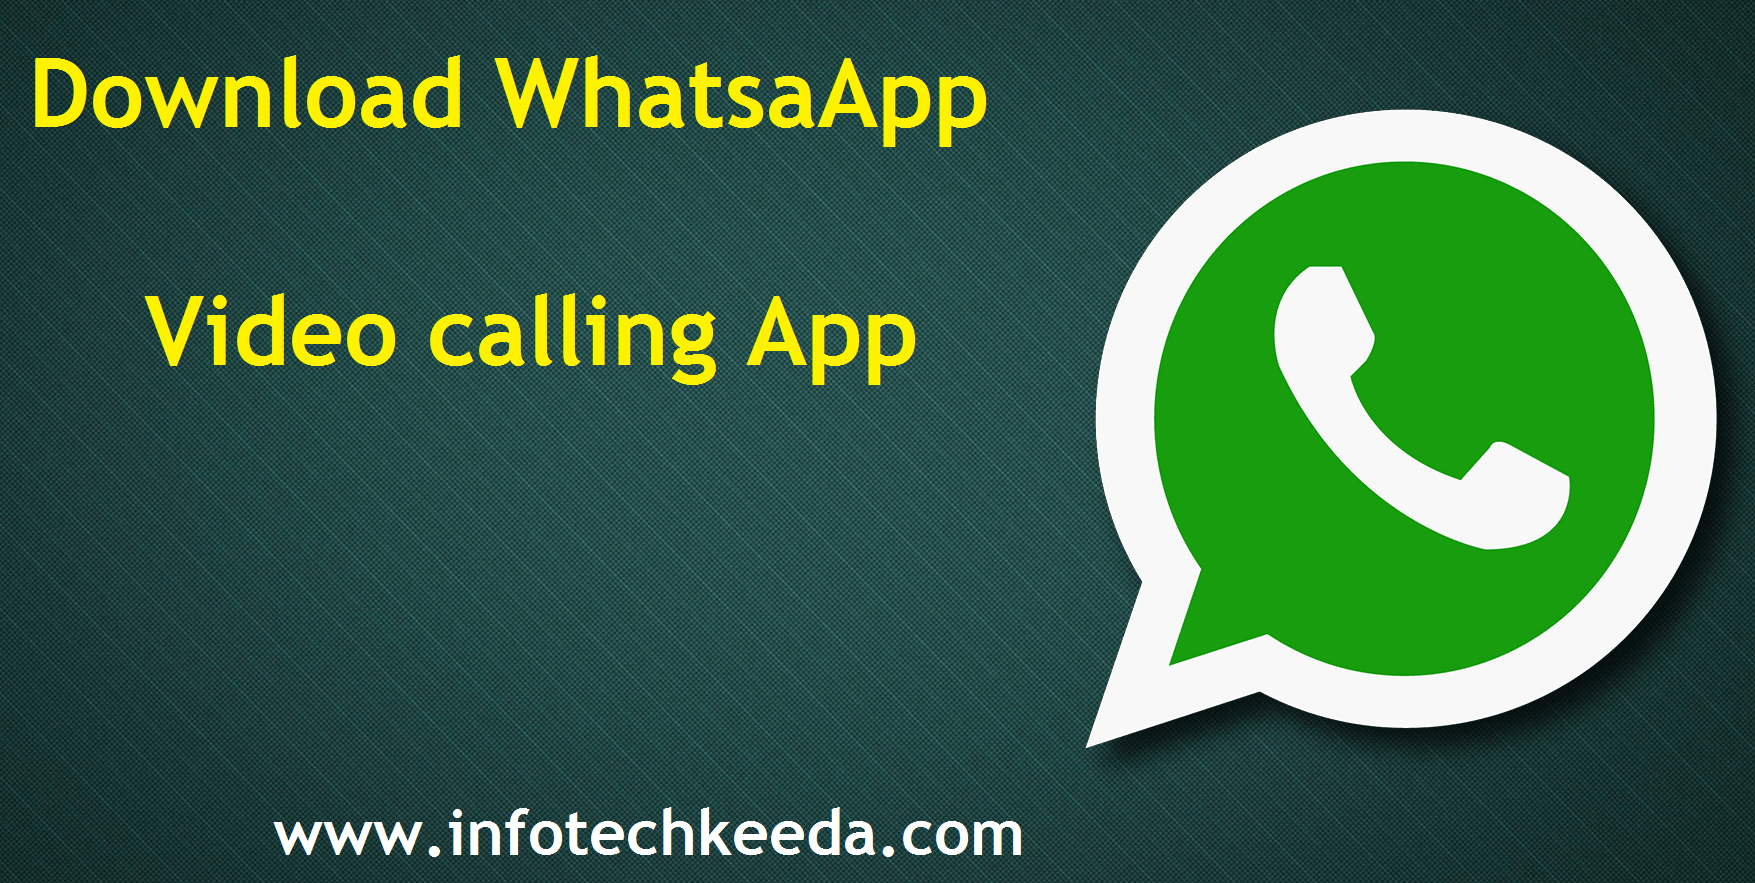 Whatsapp Video calling app download and also become beta tester link attached